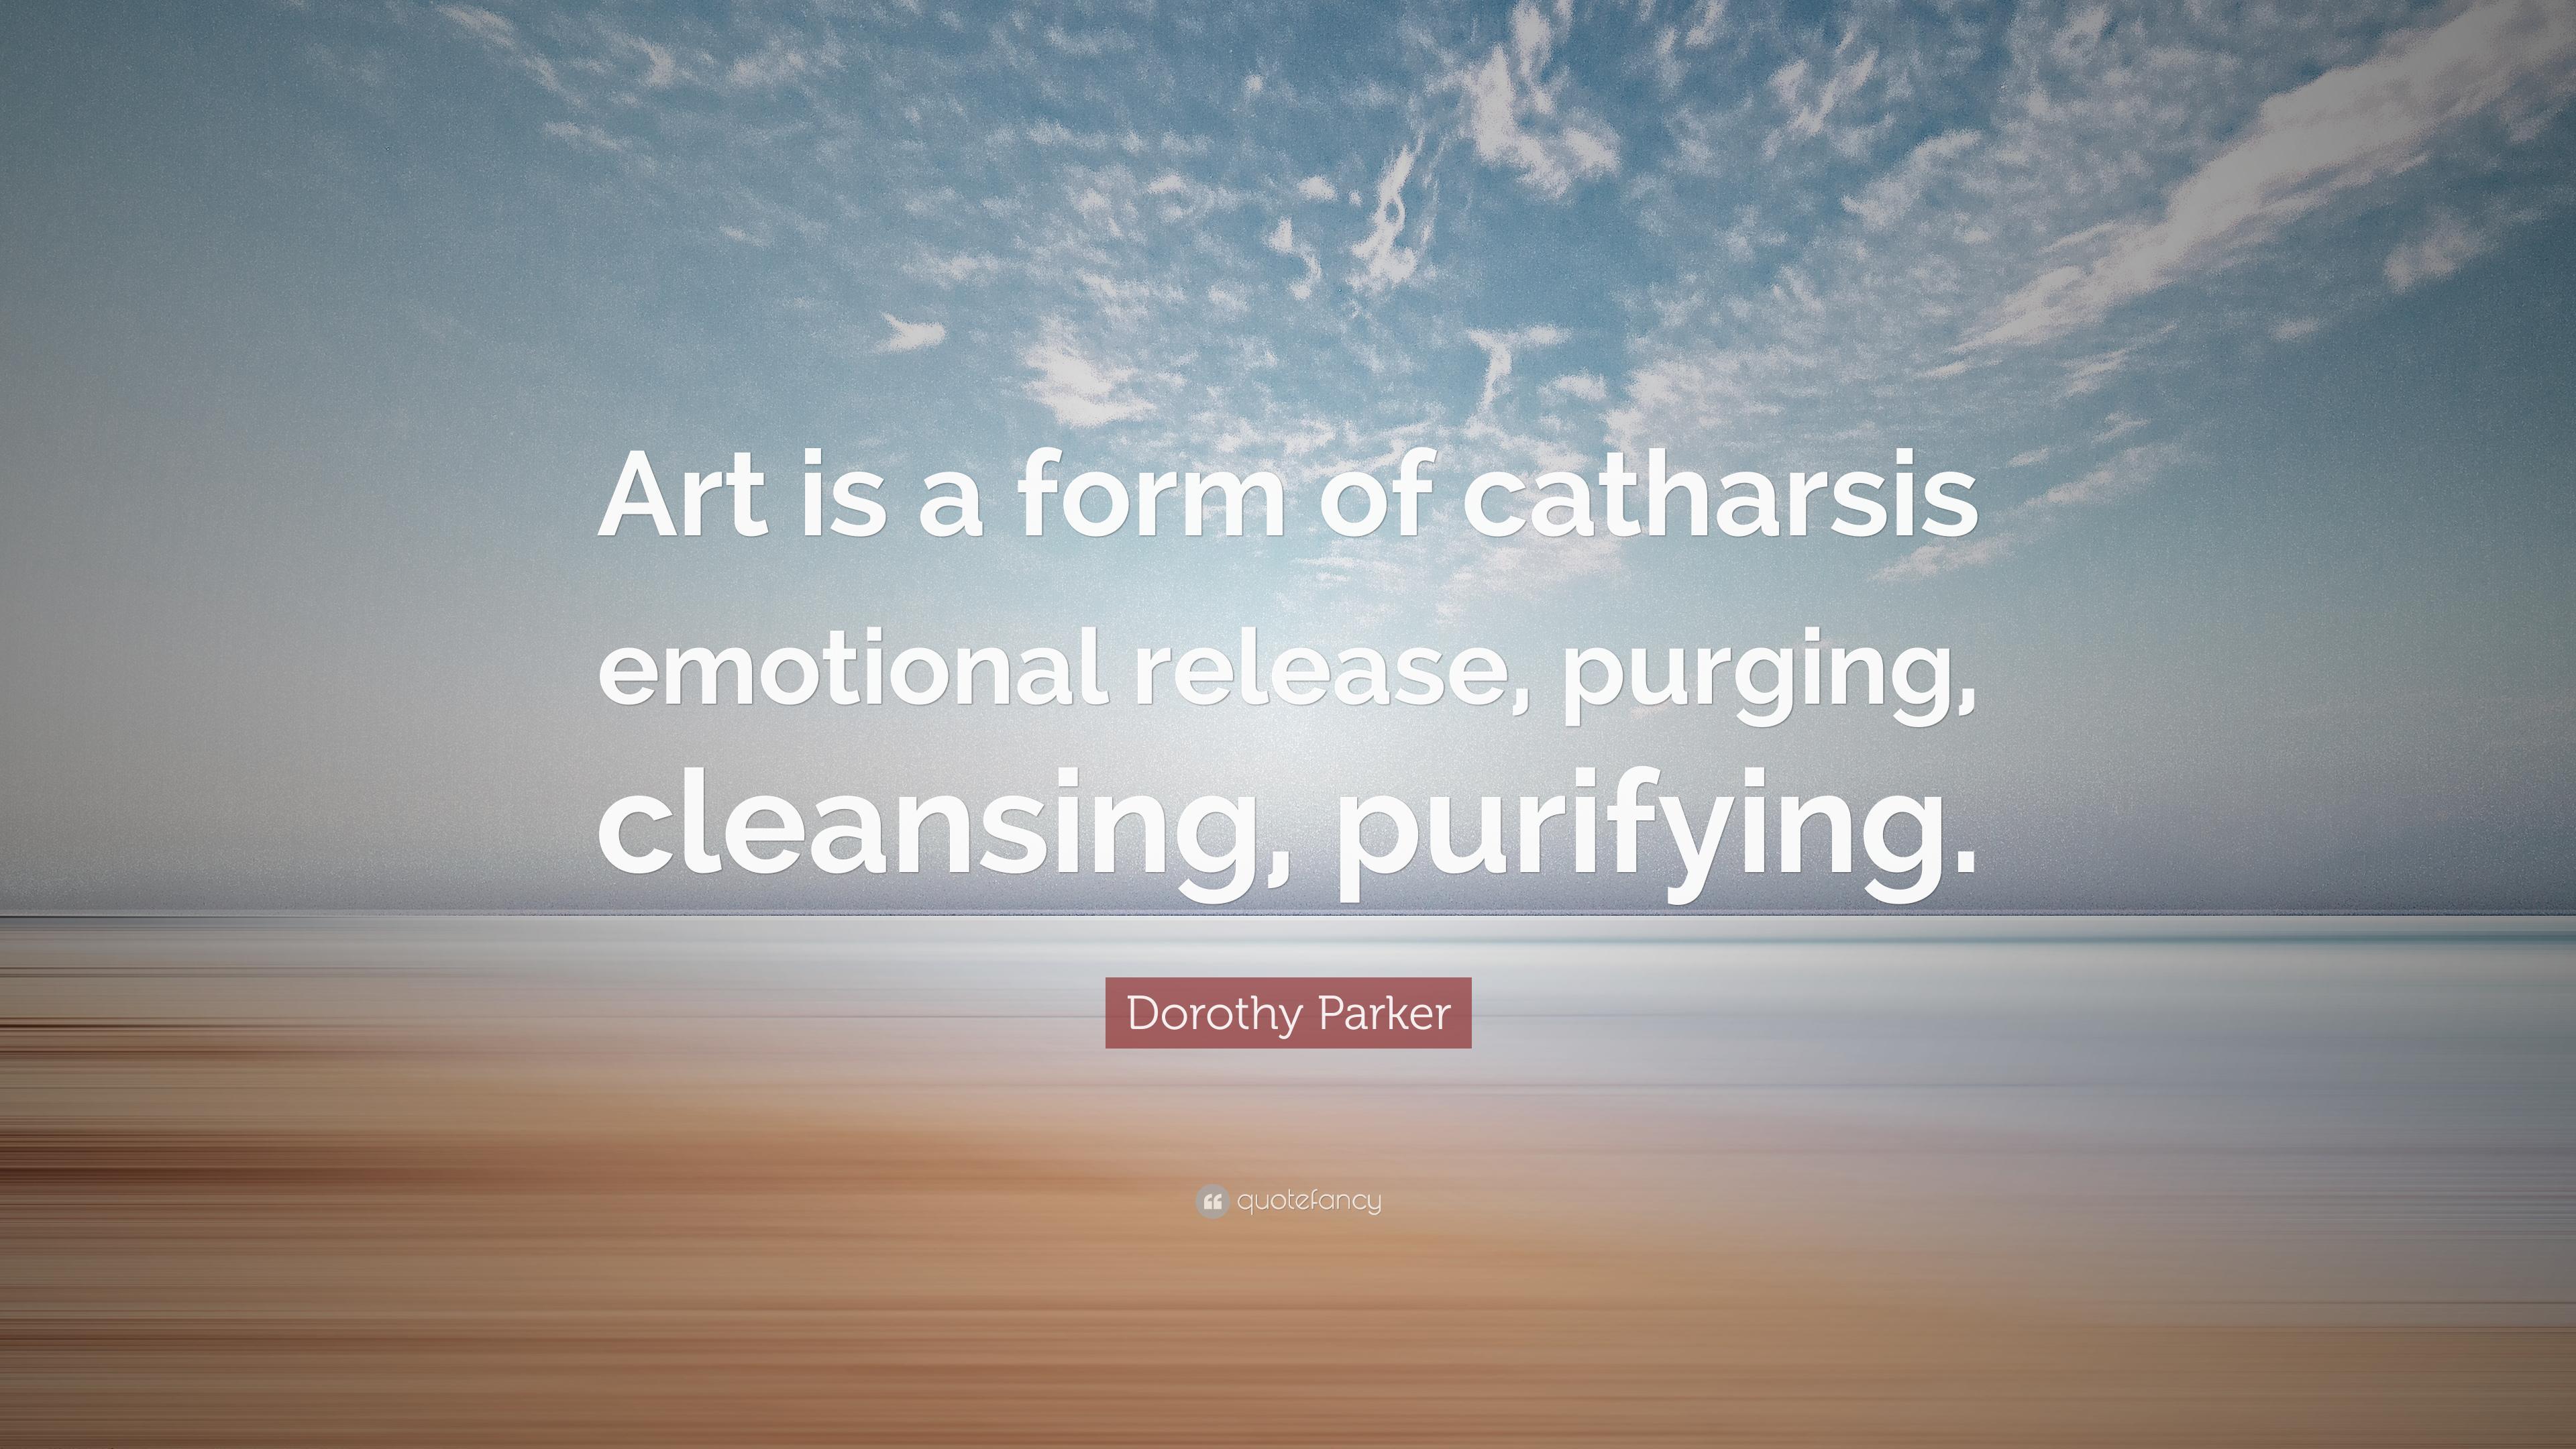 Dorothy Parker Quote: “Art is a form of catharsis emotional